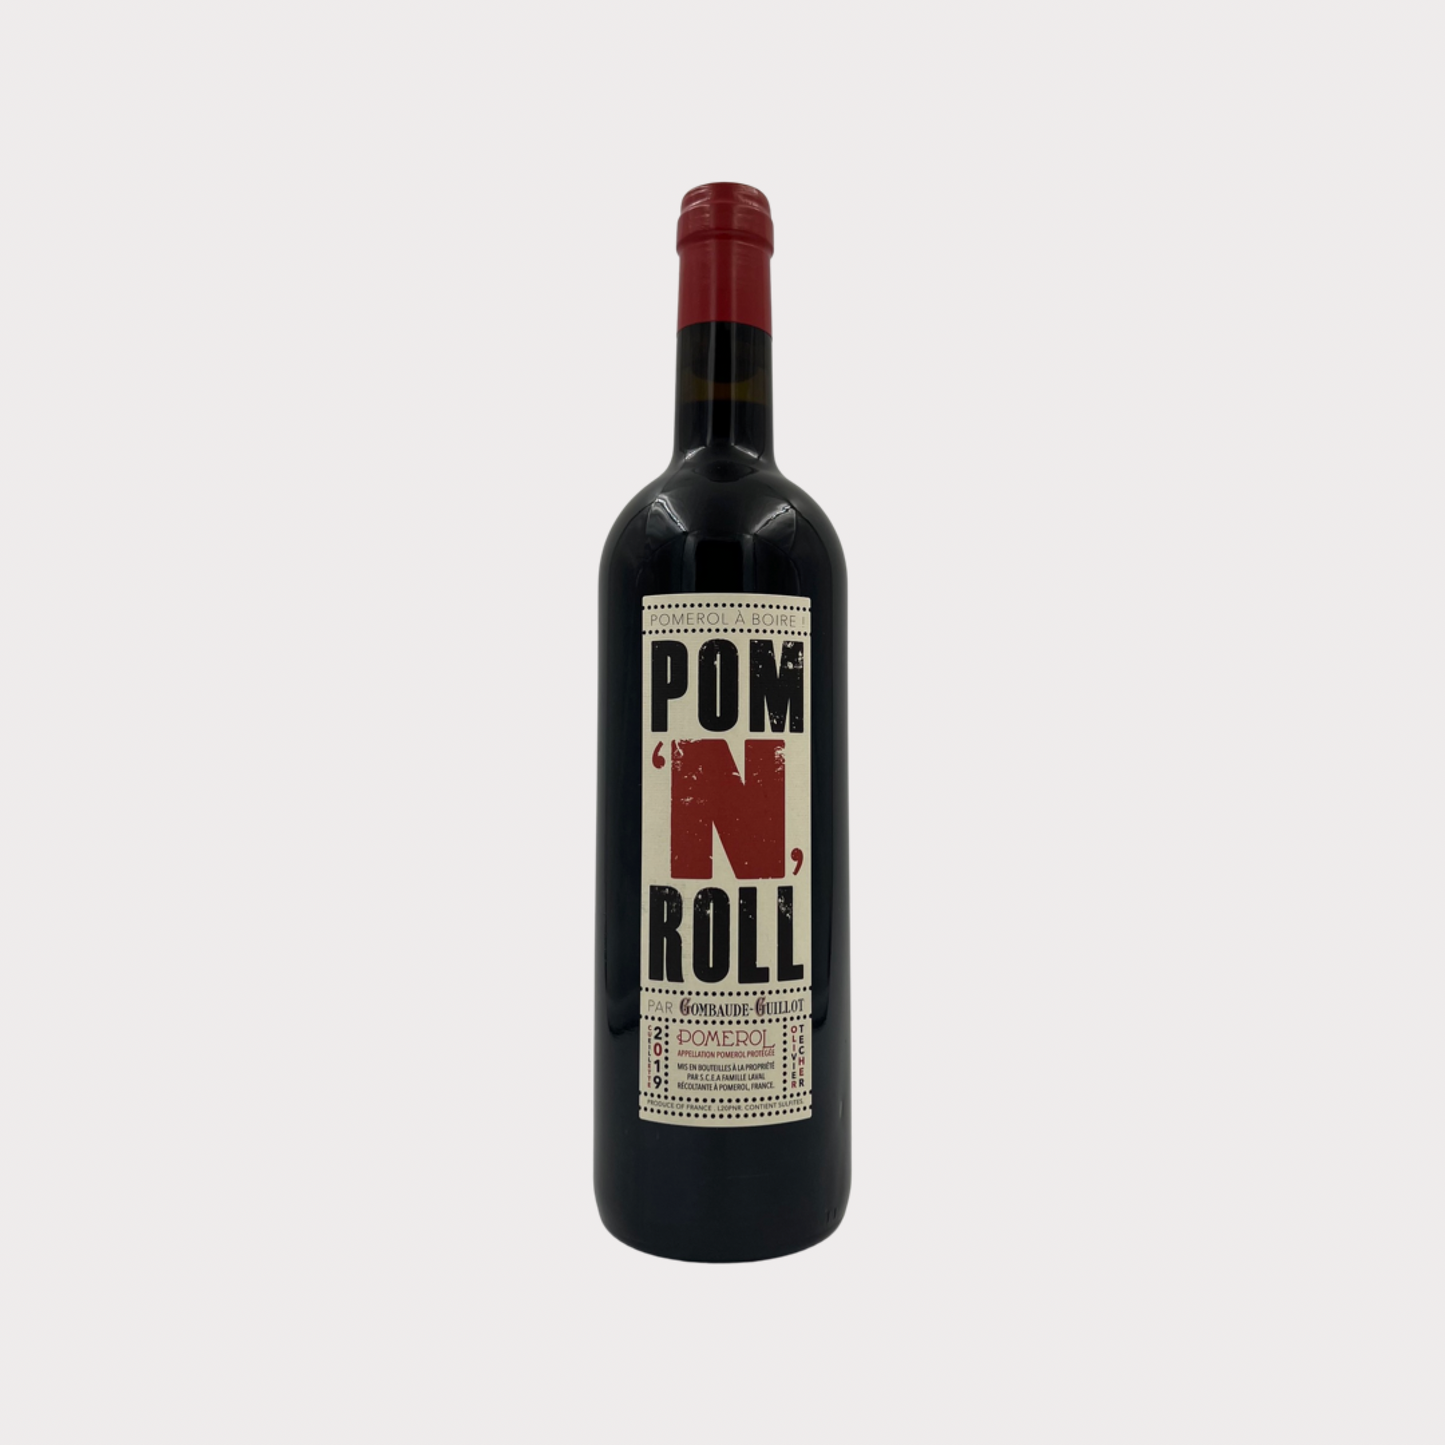 Chateau Gombaude-Guillot Pomerol “Pom ’N’ Roll” 2019